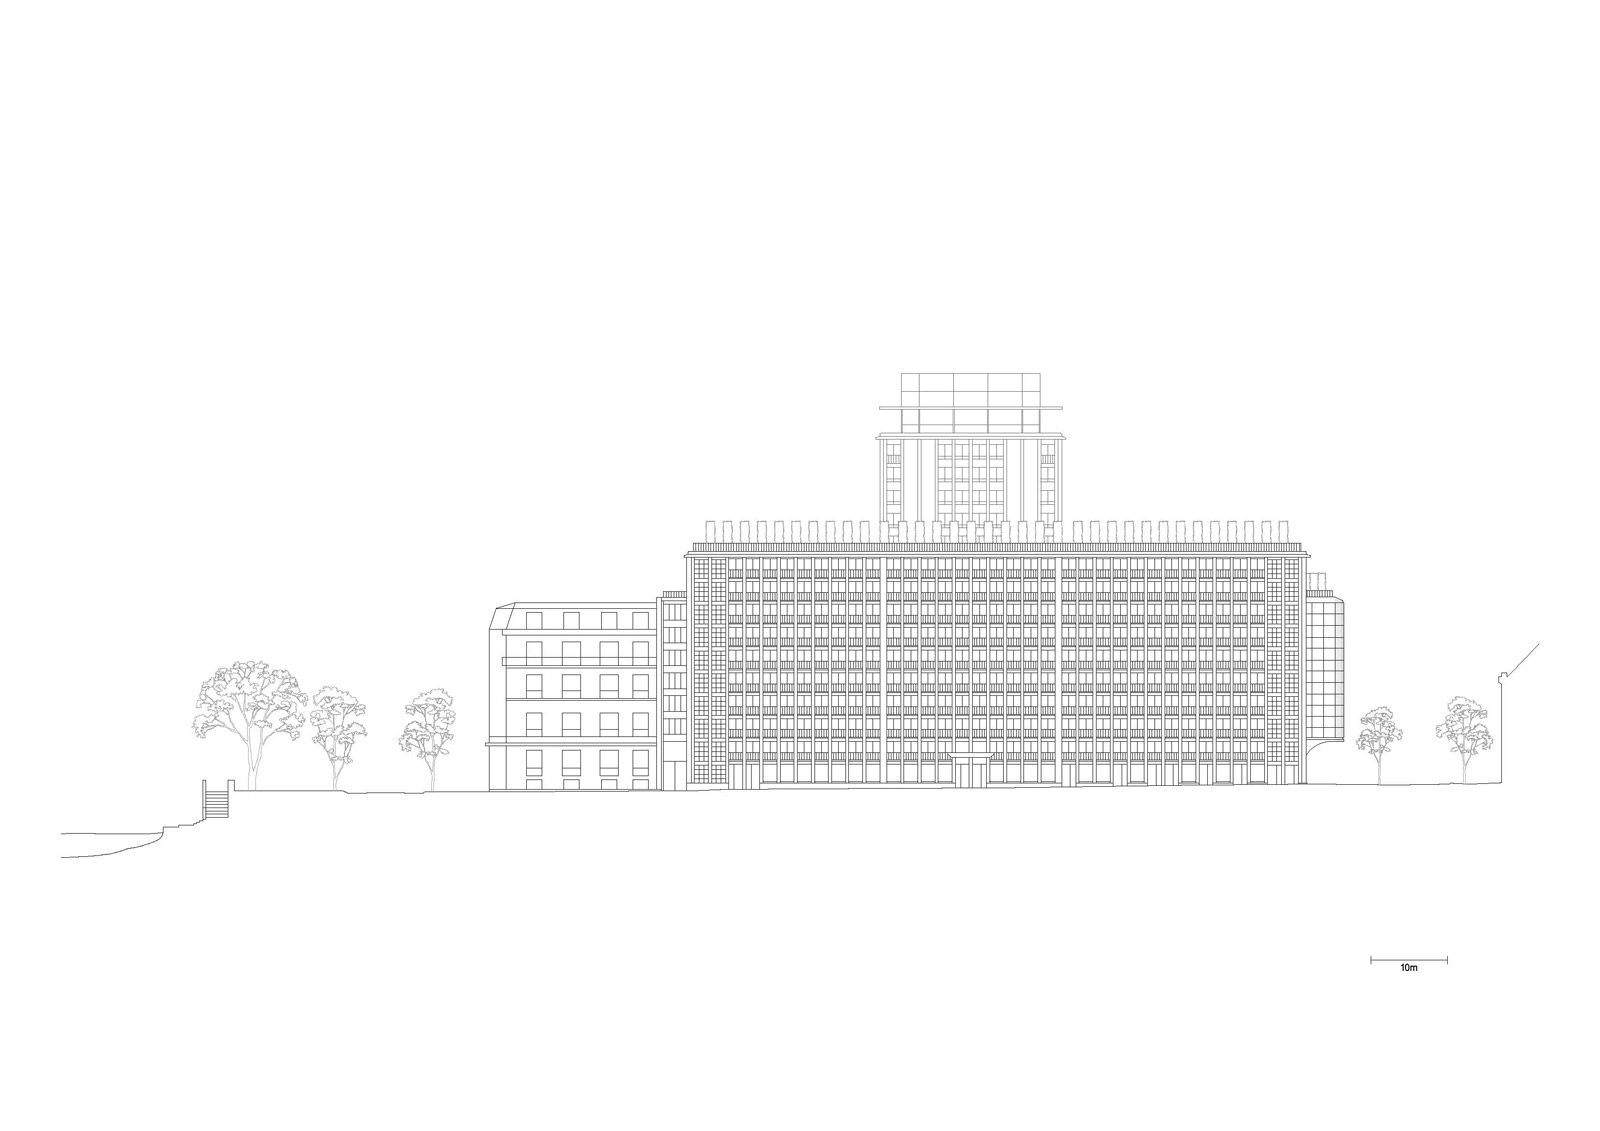 Image of 20220913 Chipperfield MorlandMixiteCapitale 21 in Morland Mixité Capitale - Cosentino